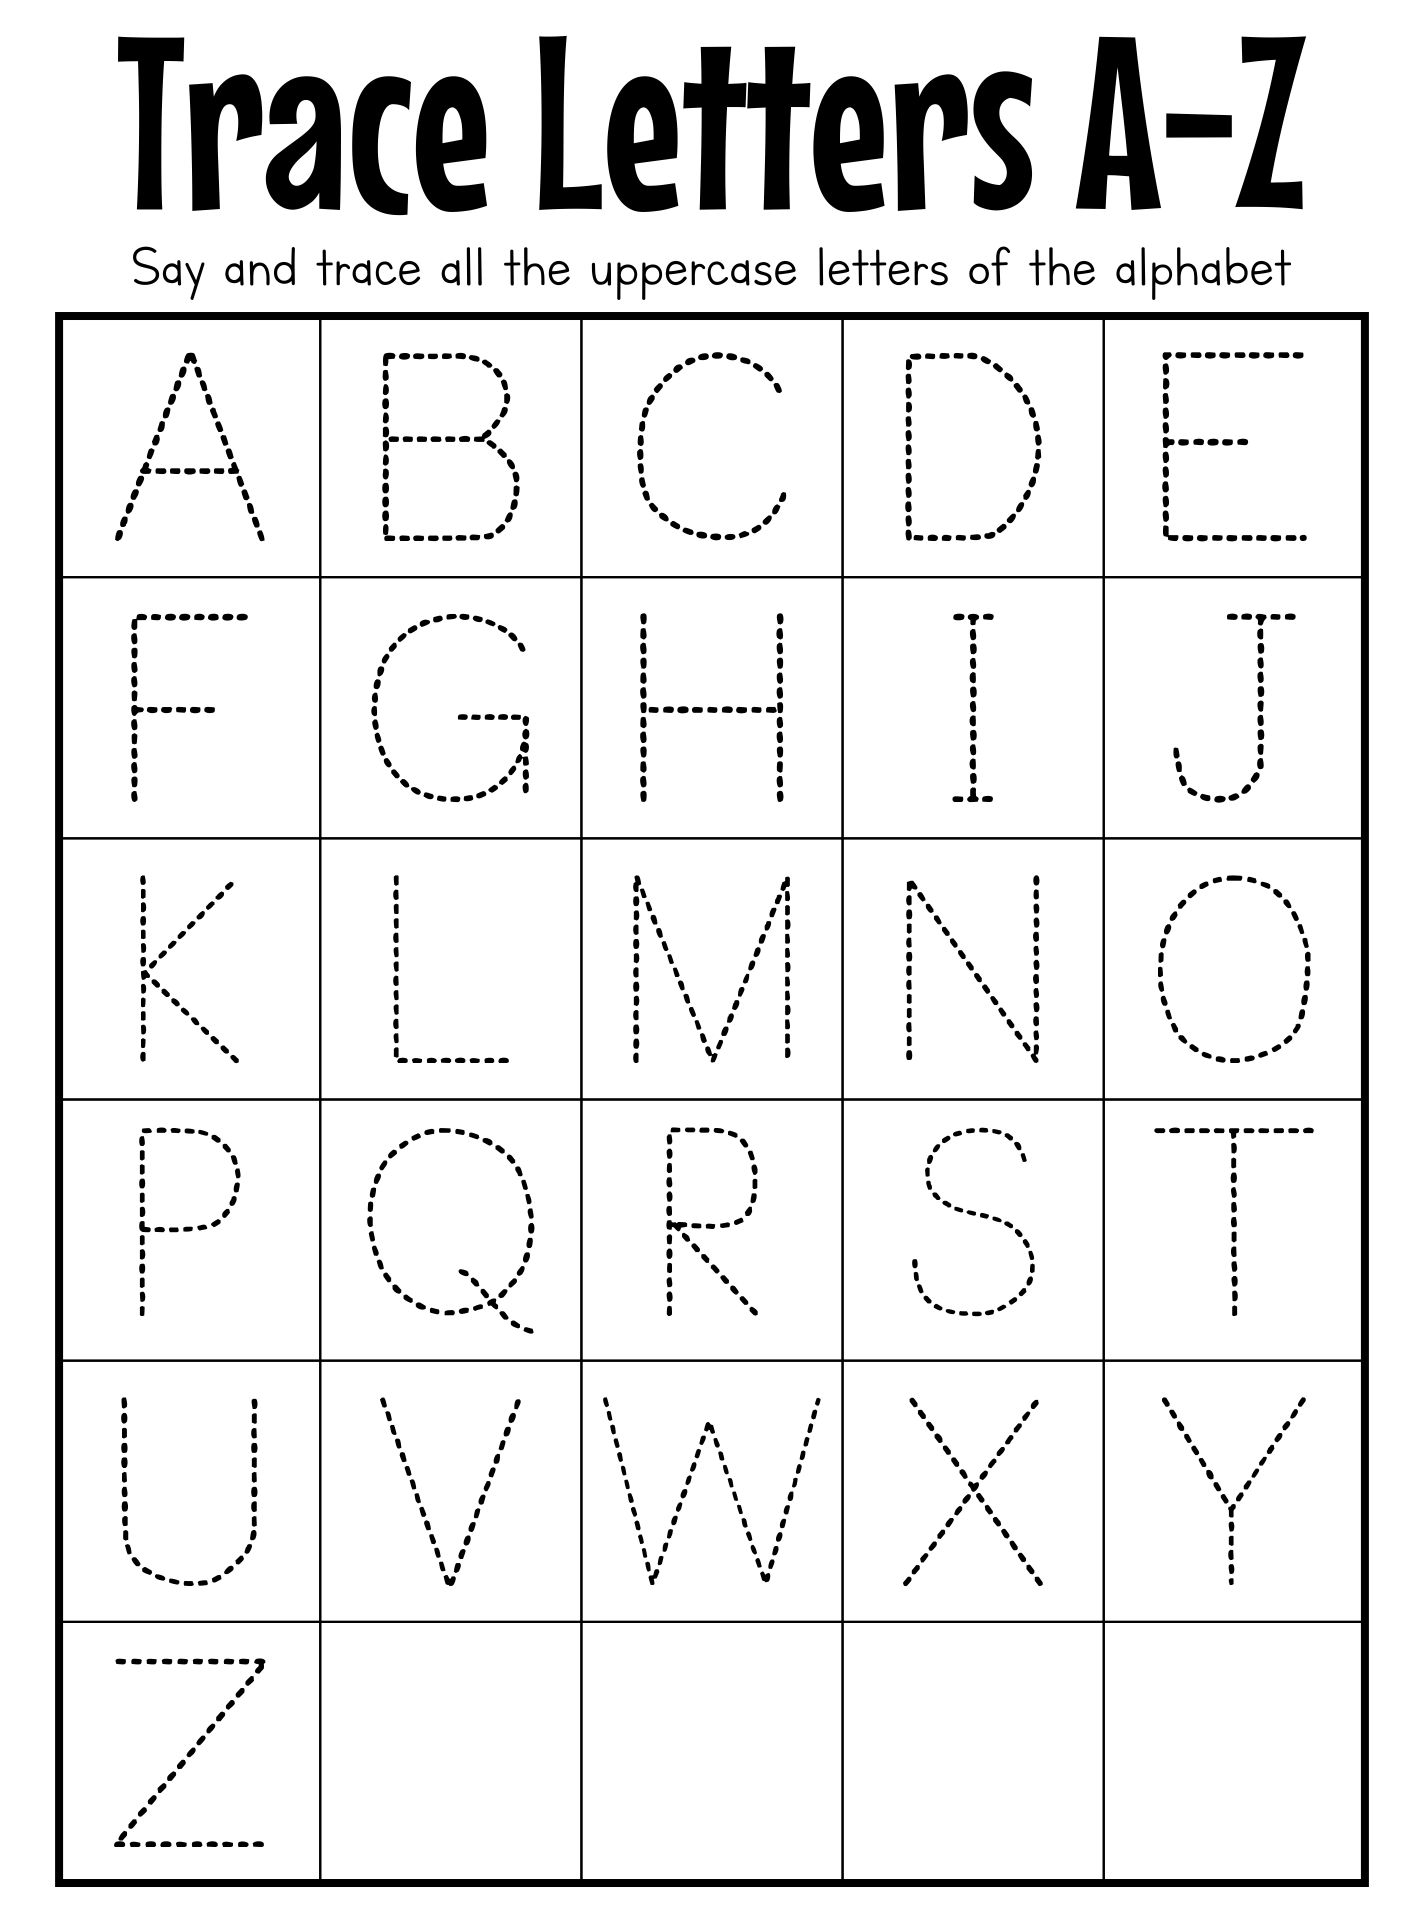 printable-alphabet-tracing-abc-worksheet-images-and-photos-finder